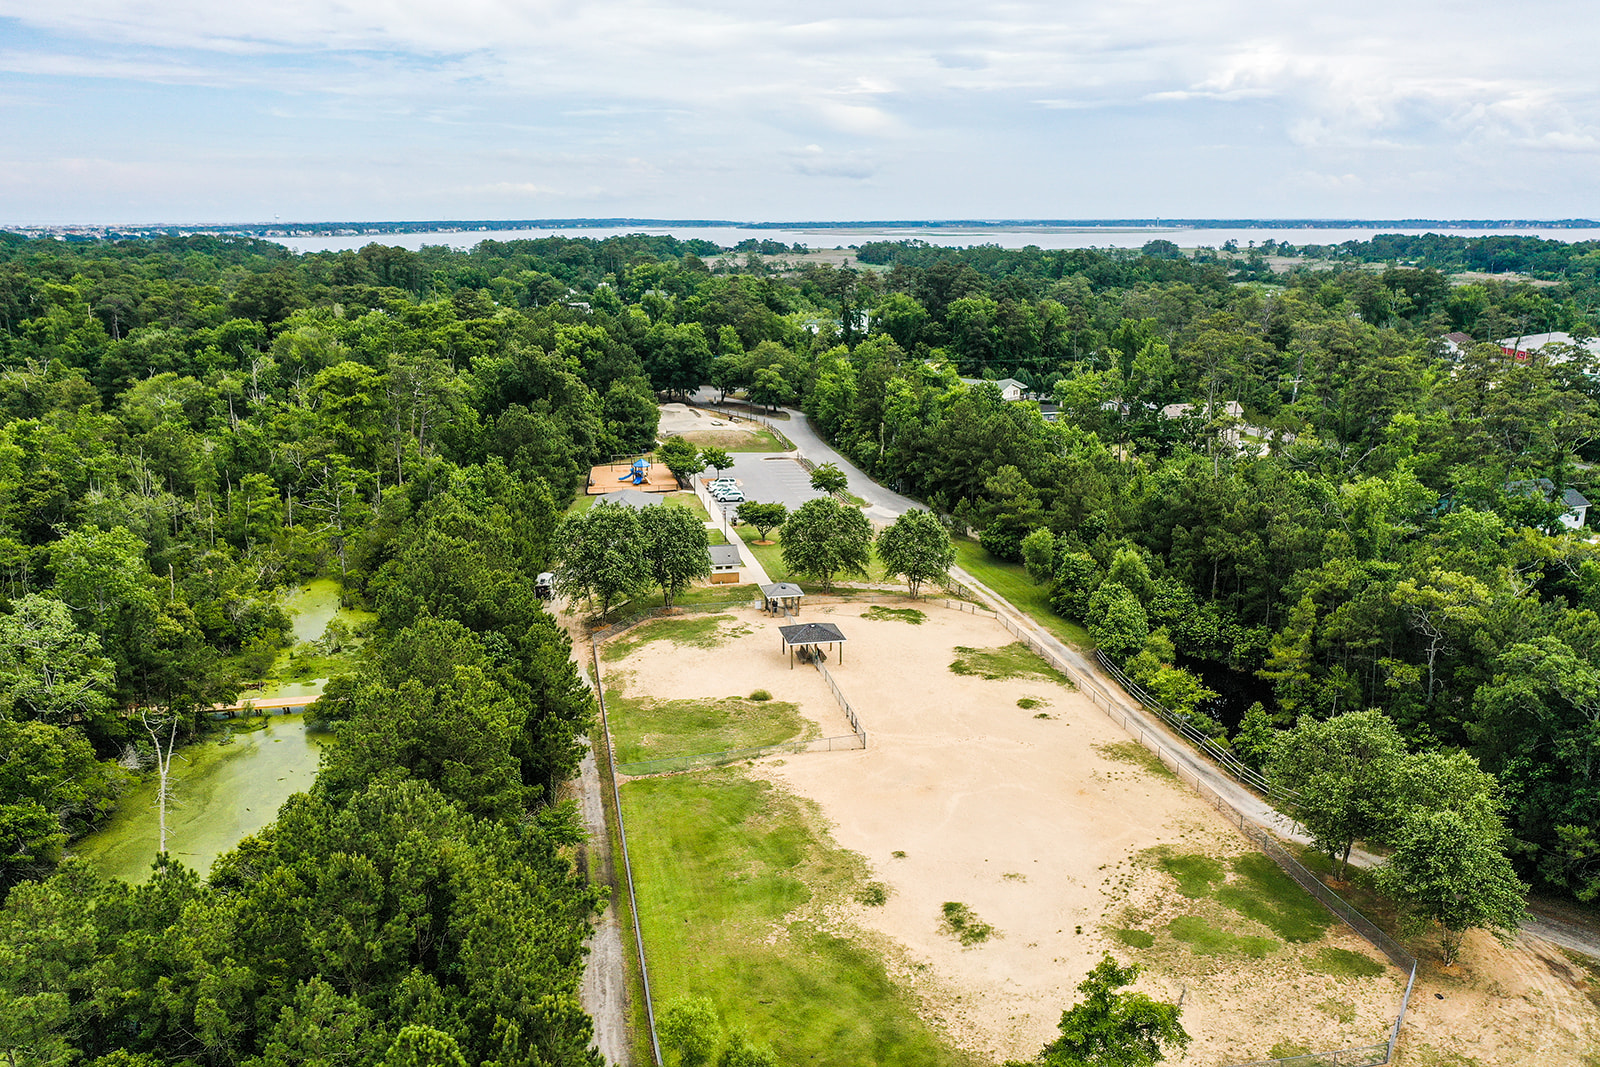 Aerial image of a park featuring a sandy dog park.